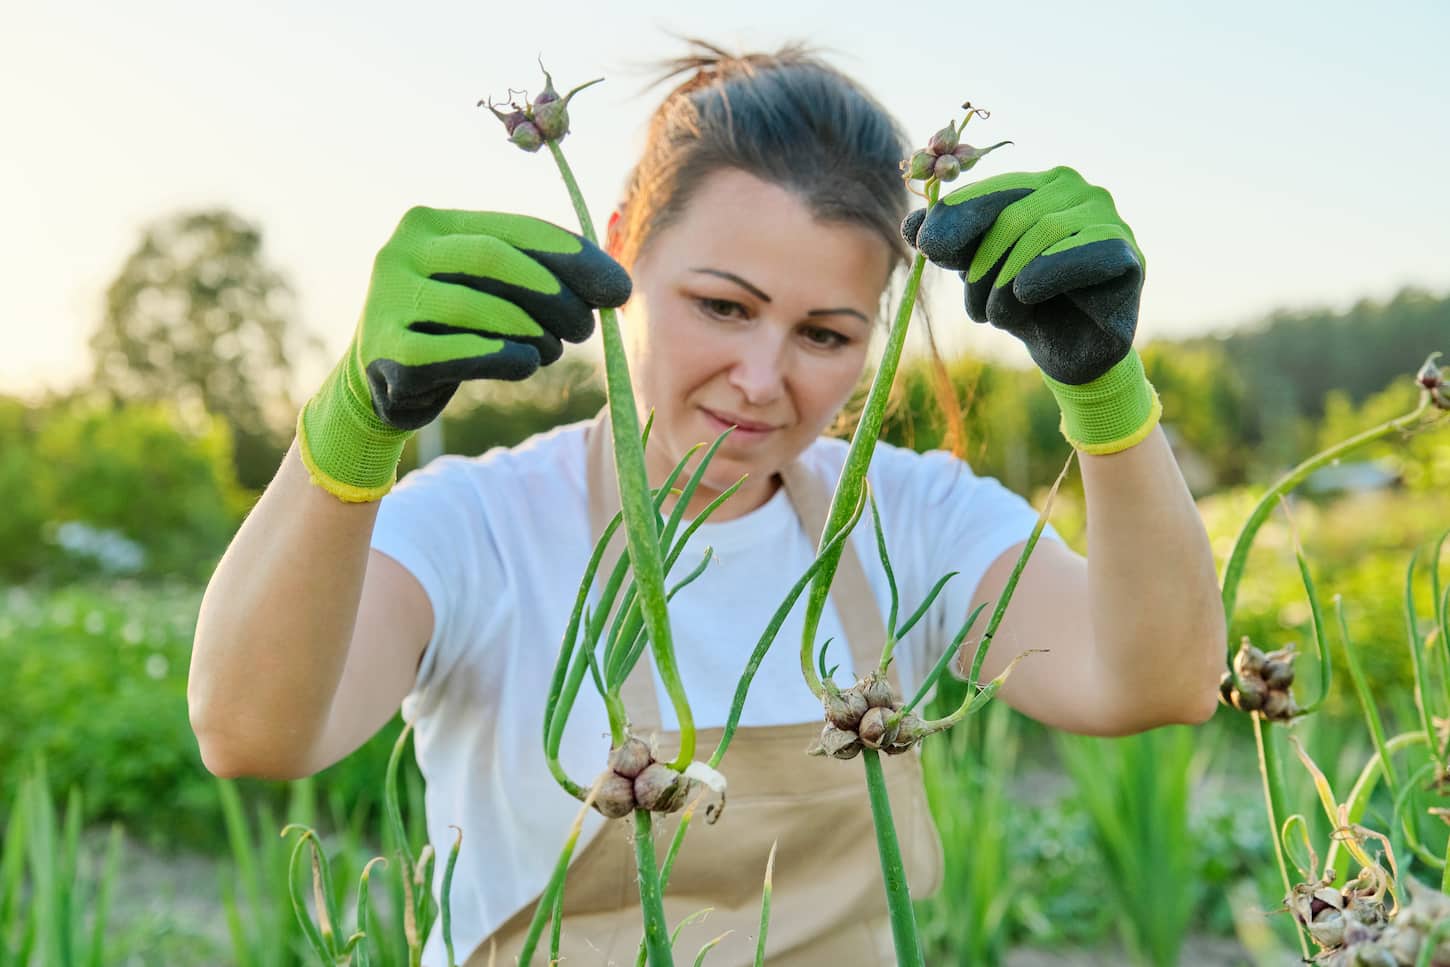 An image of a woman in vegetable garden with bunk green onion crop.